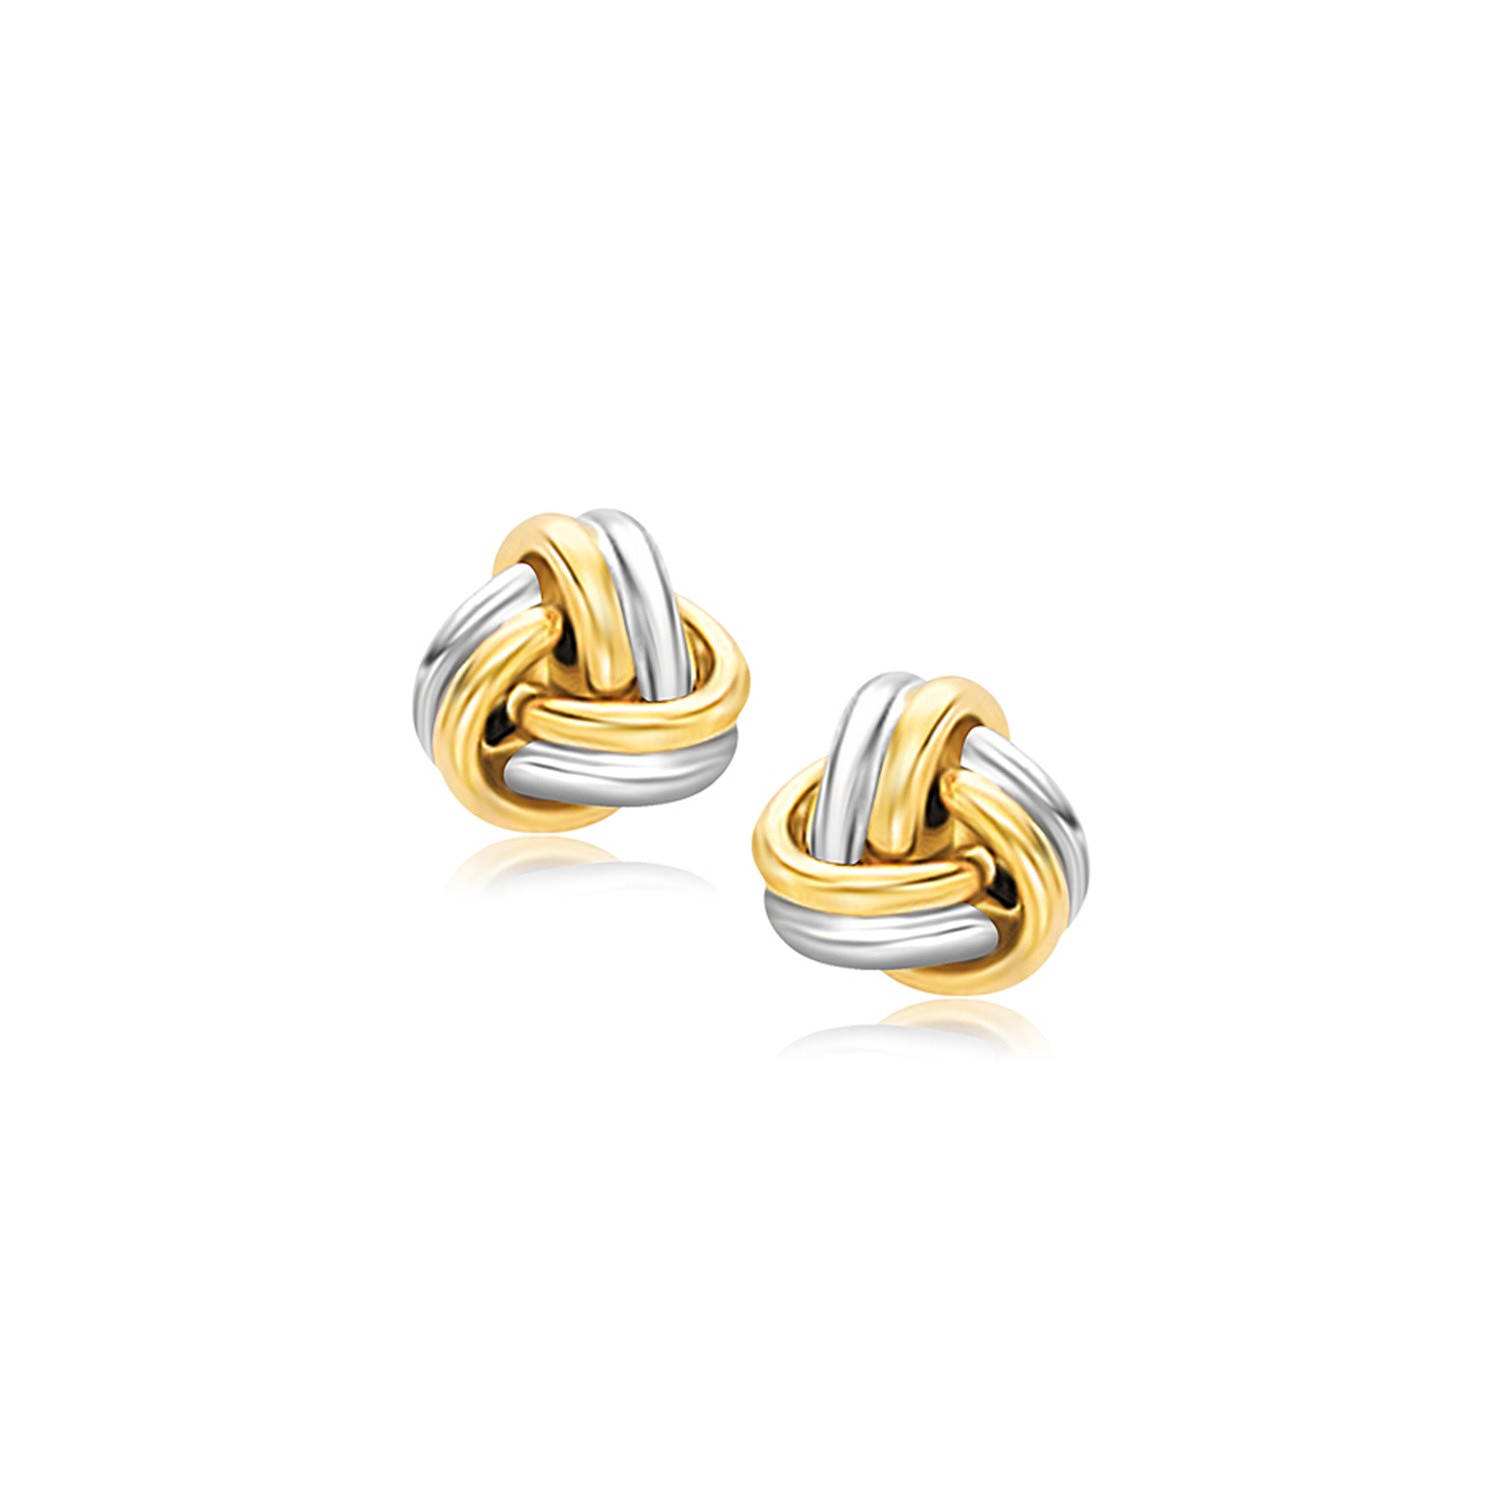 Details about   Leslie's Real 14kt Two-tone Polished Love Knot Earrings 